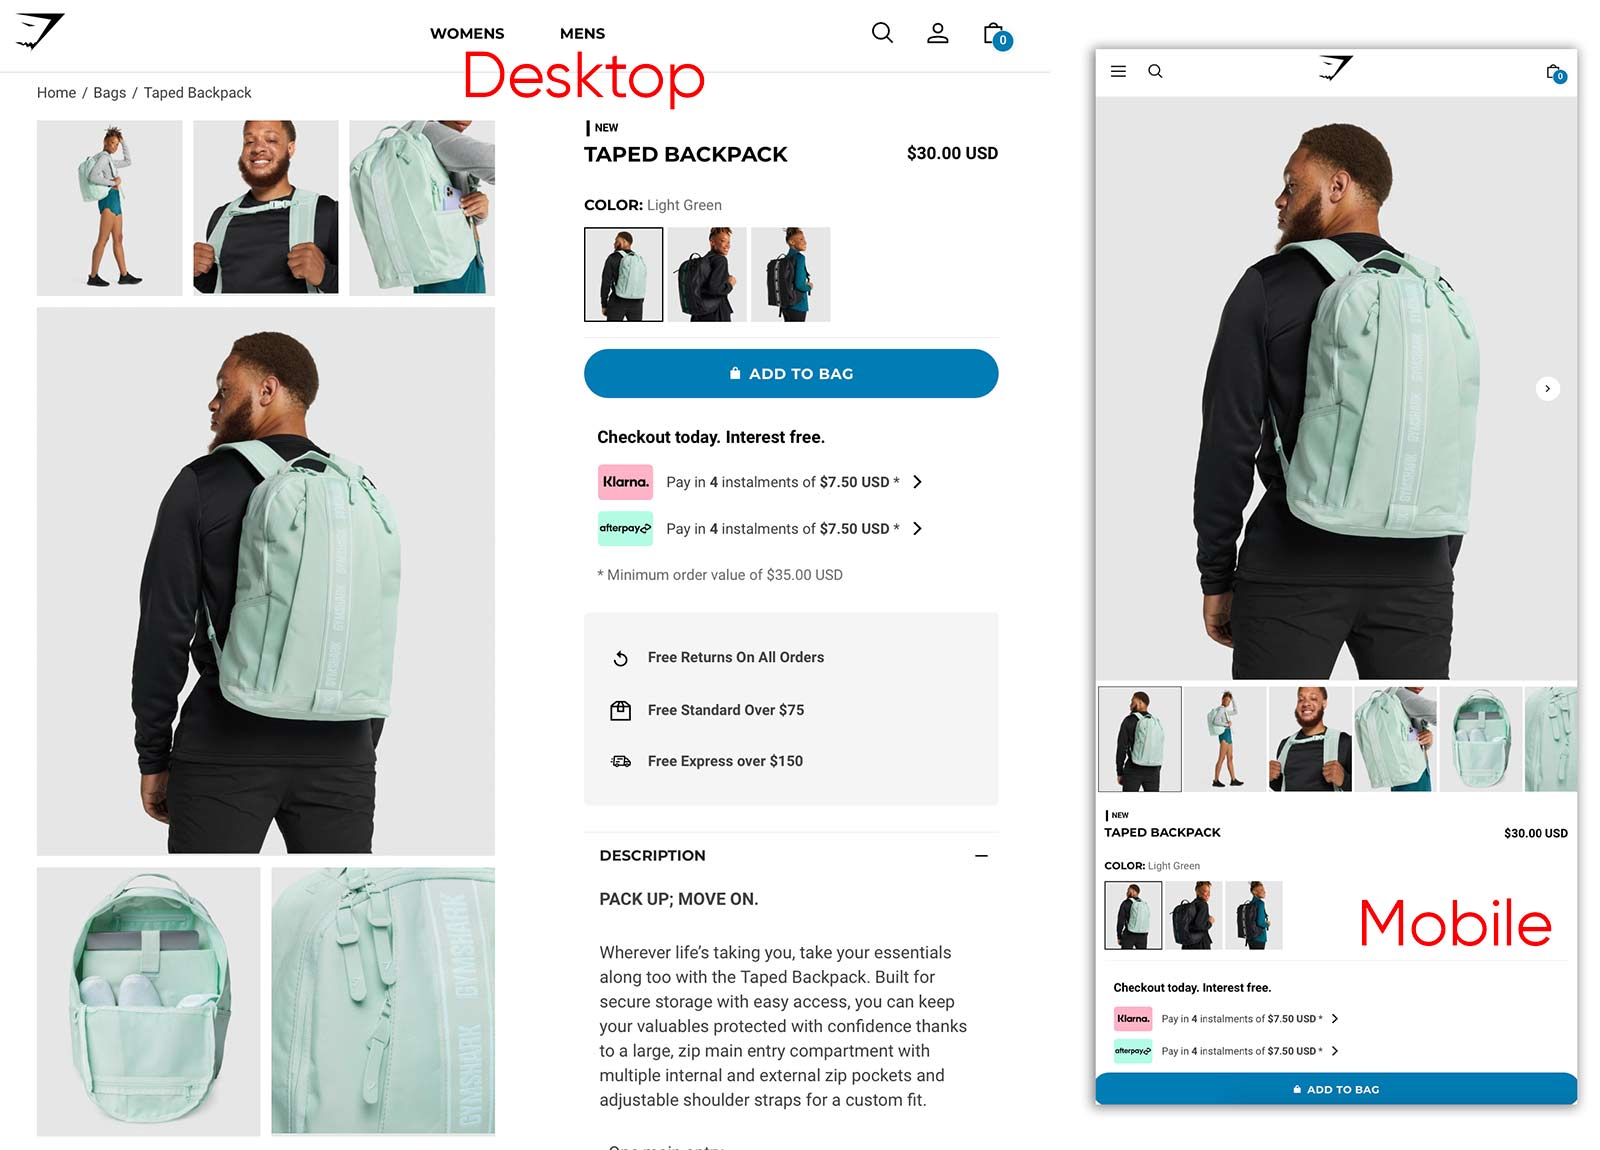 Gymshark backpack product page, showing several product use images in a grid